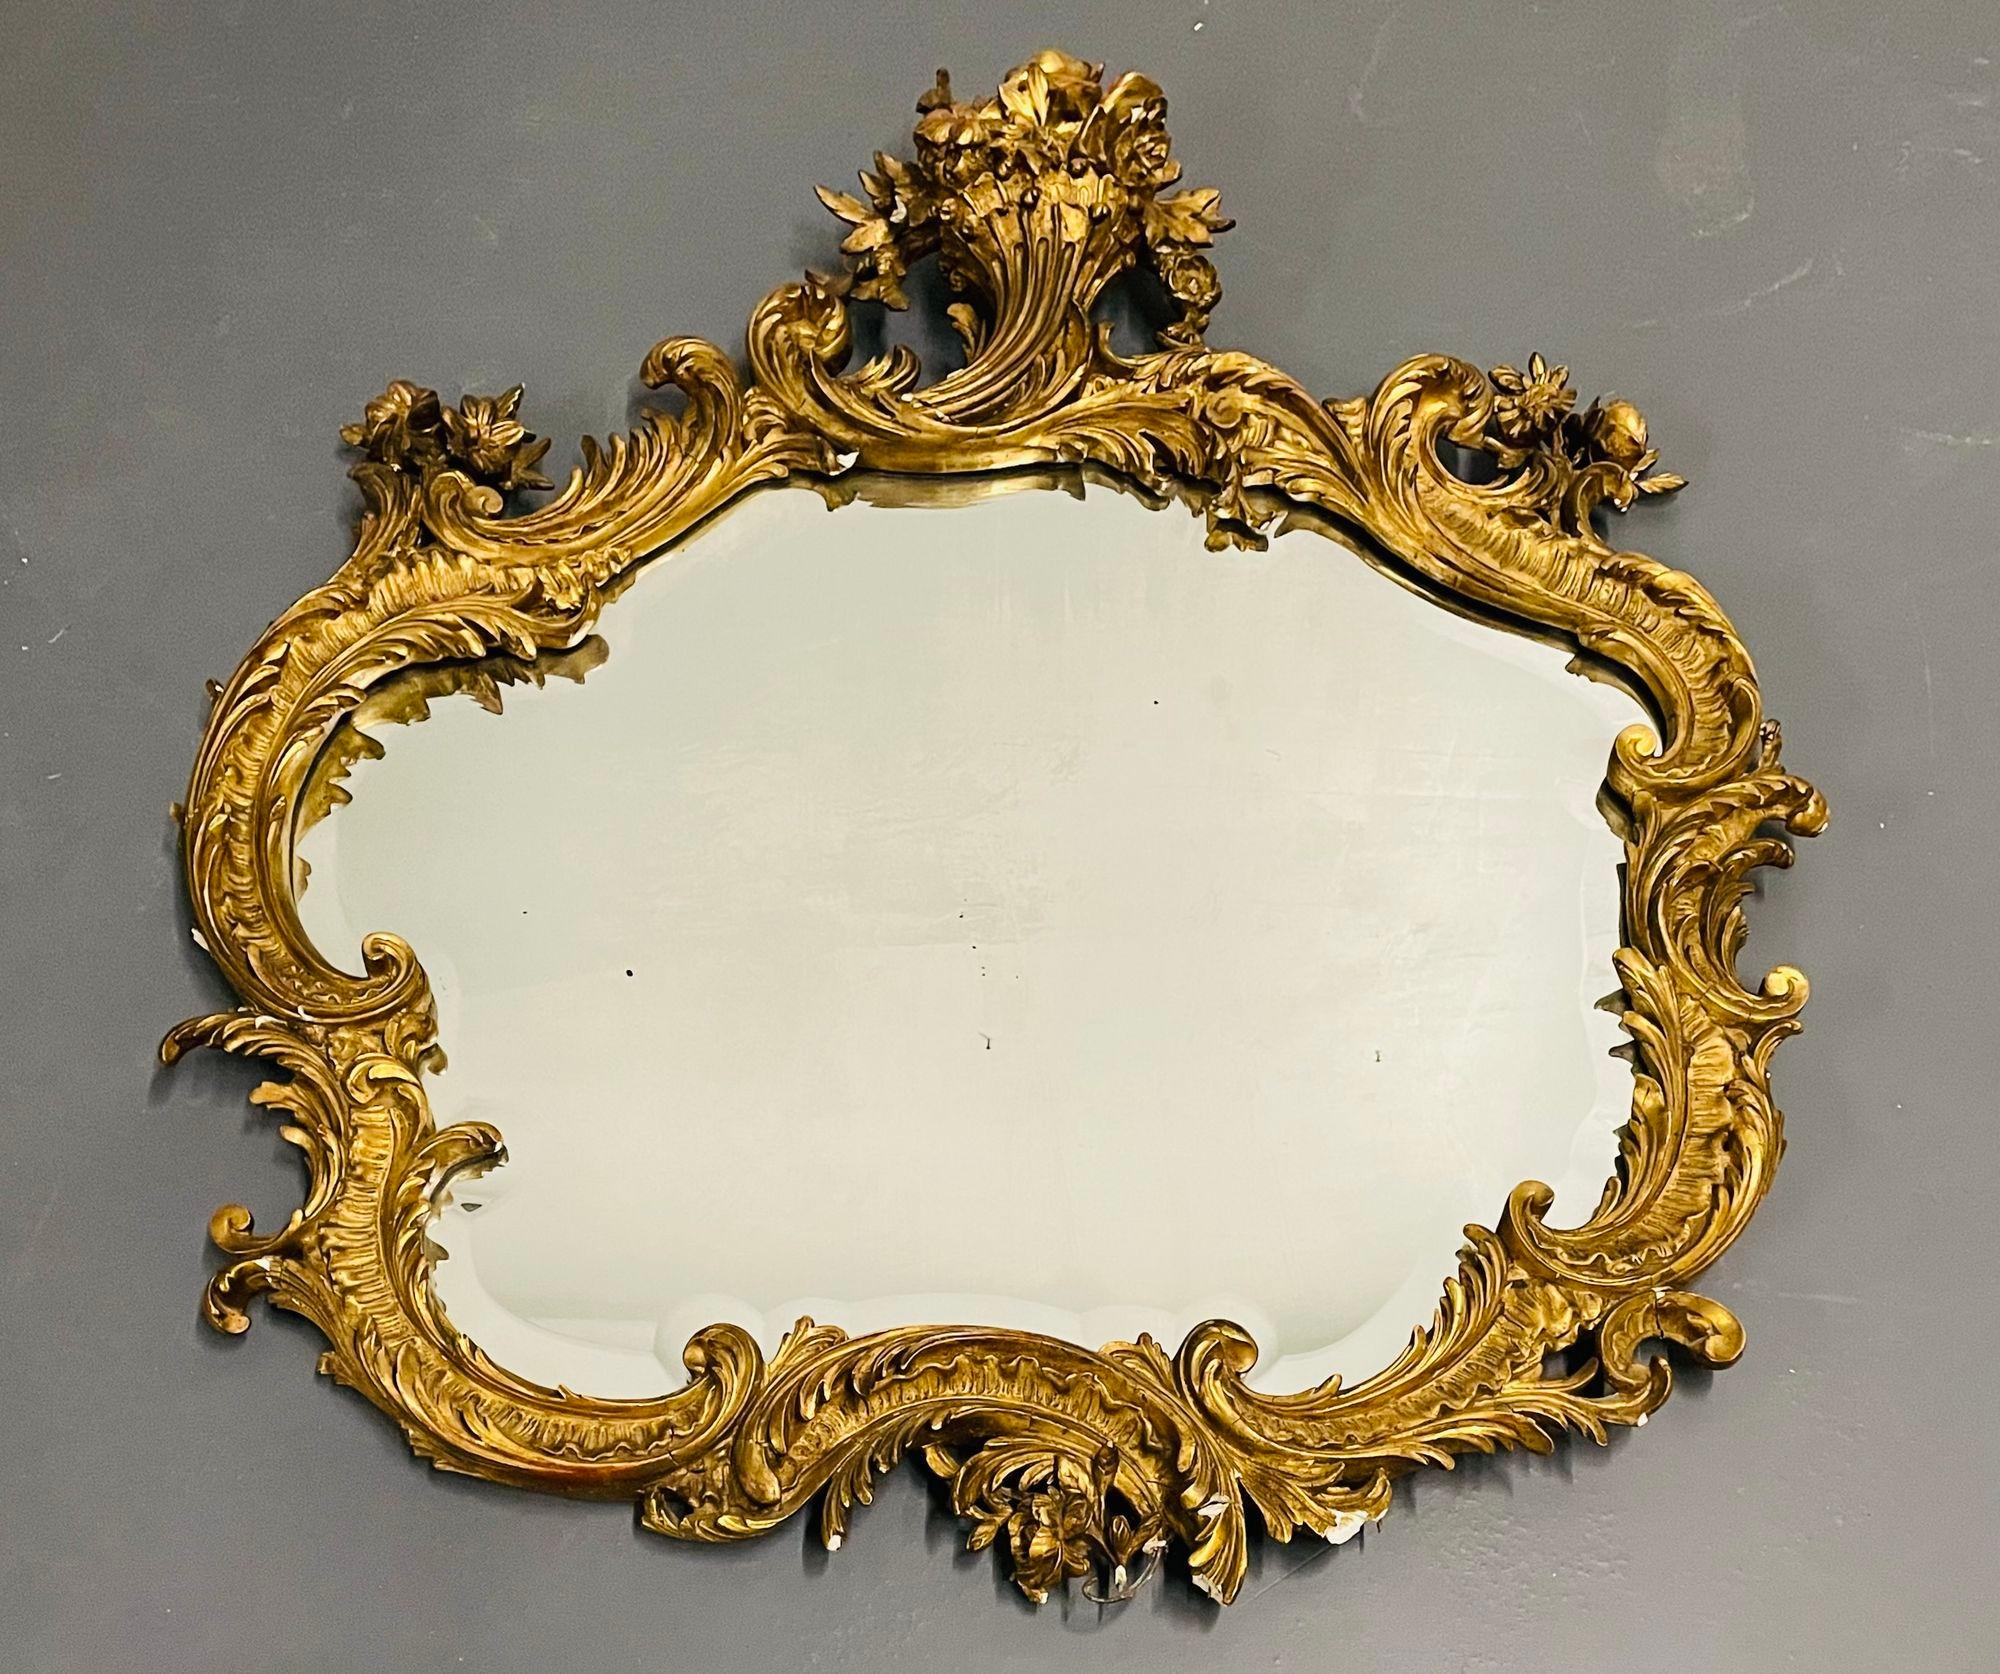 19th-20th Century Giltwood French Mirror, Wall or Console, Floral Decorated In Fair Condition For Sale In Stamford, CT